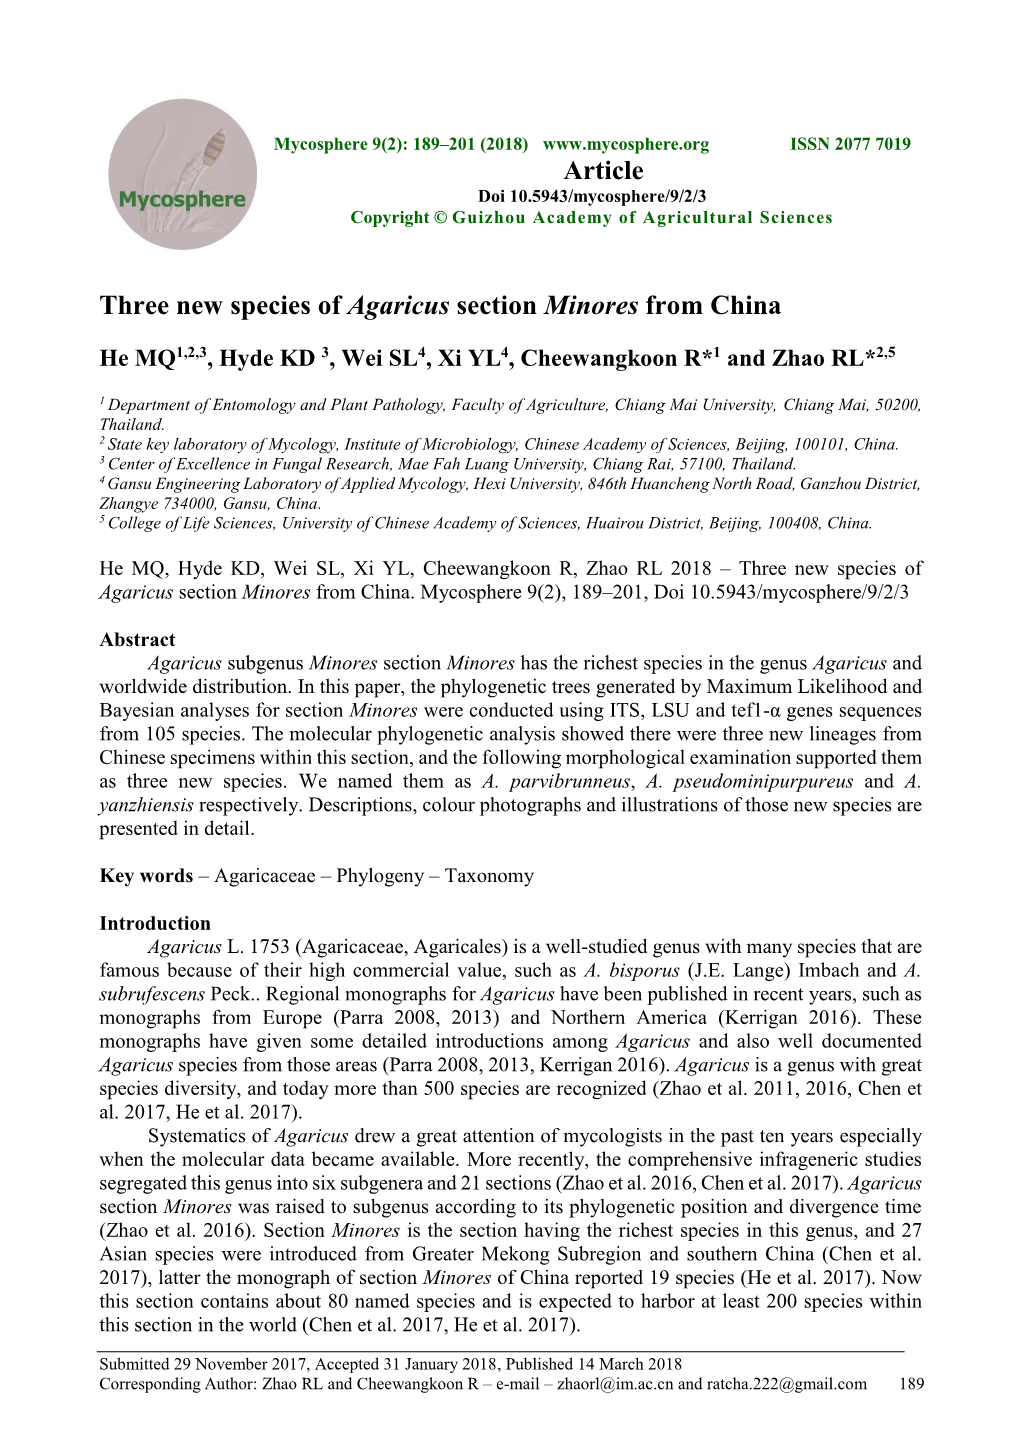 Three New Species of Agaricus Section Minores from China